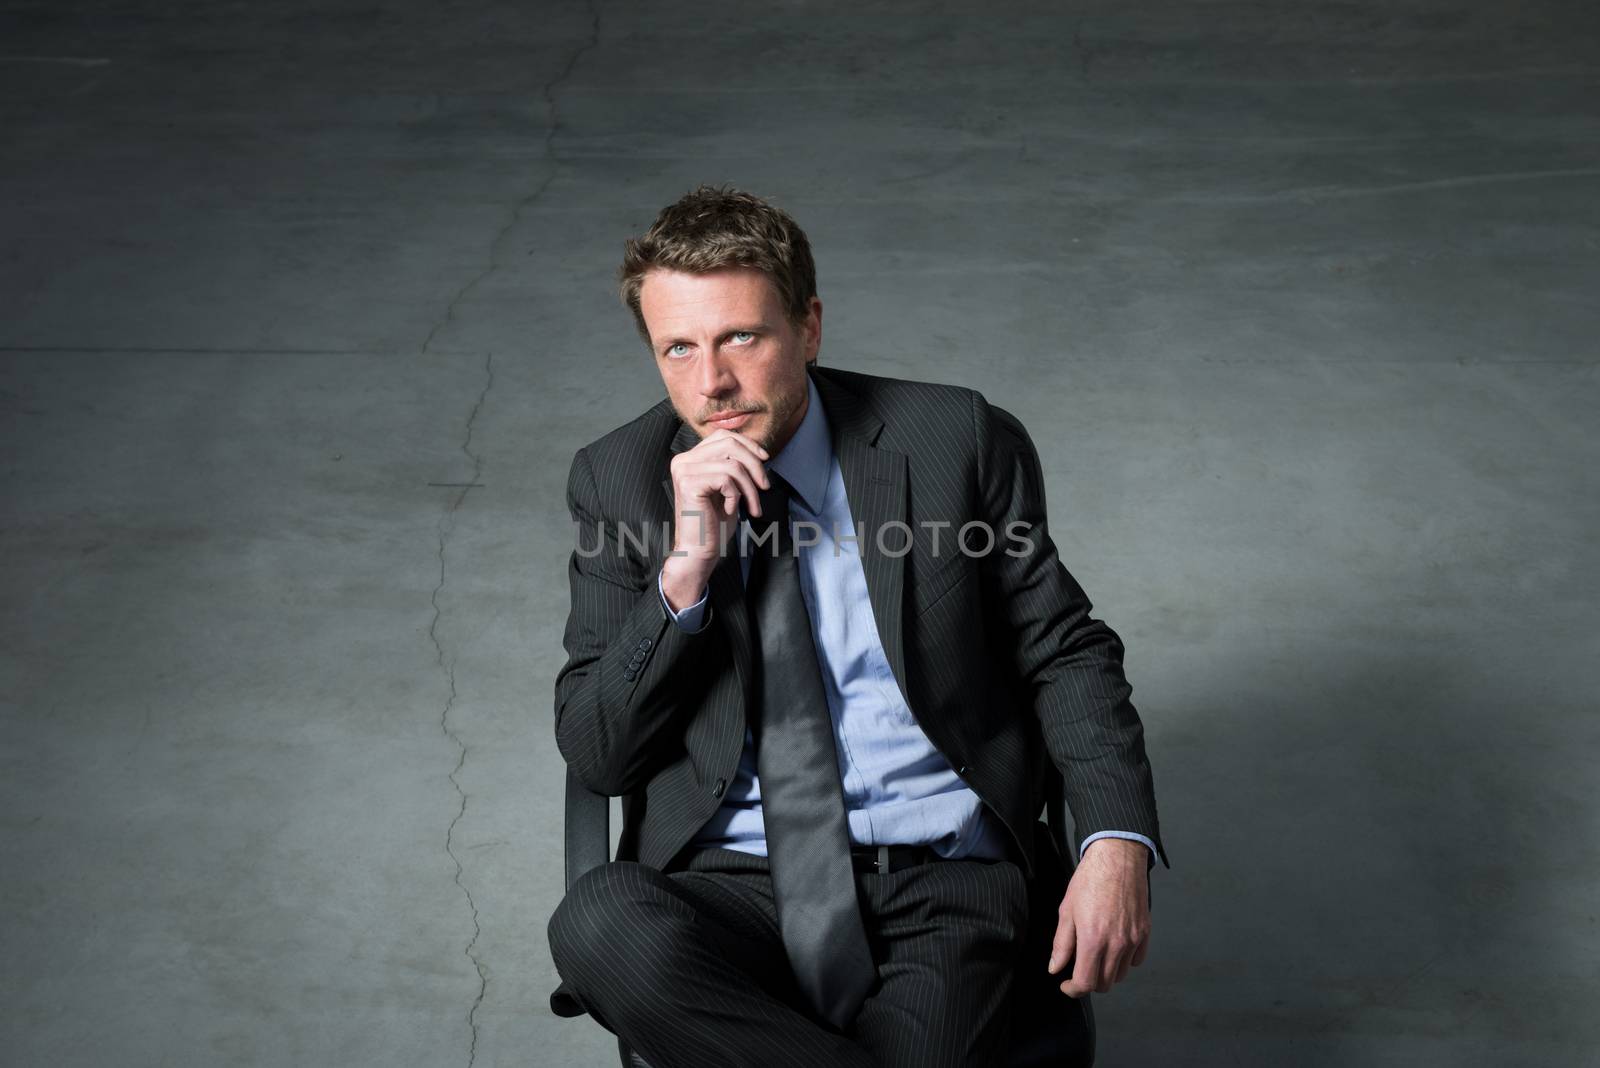 Businessman sitting on an office chair with hand on chin against concrete floor background.